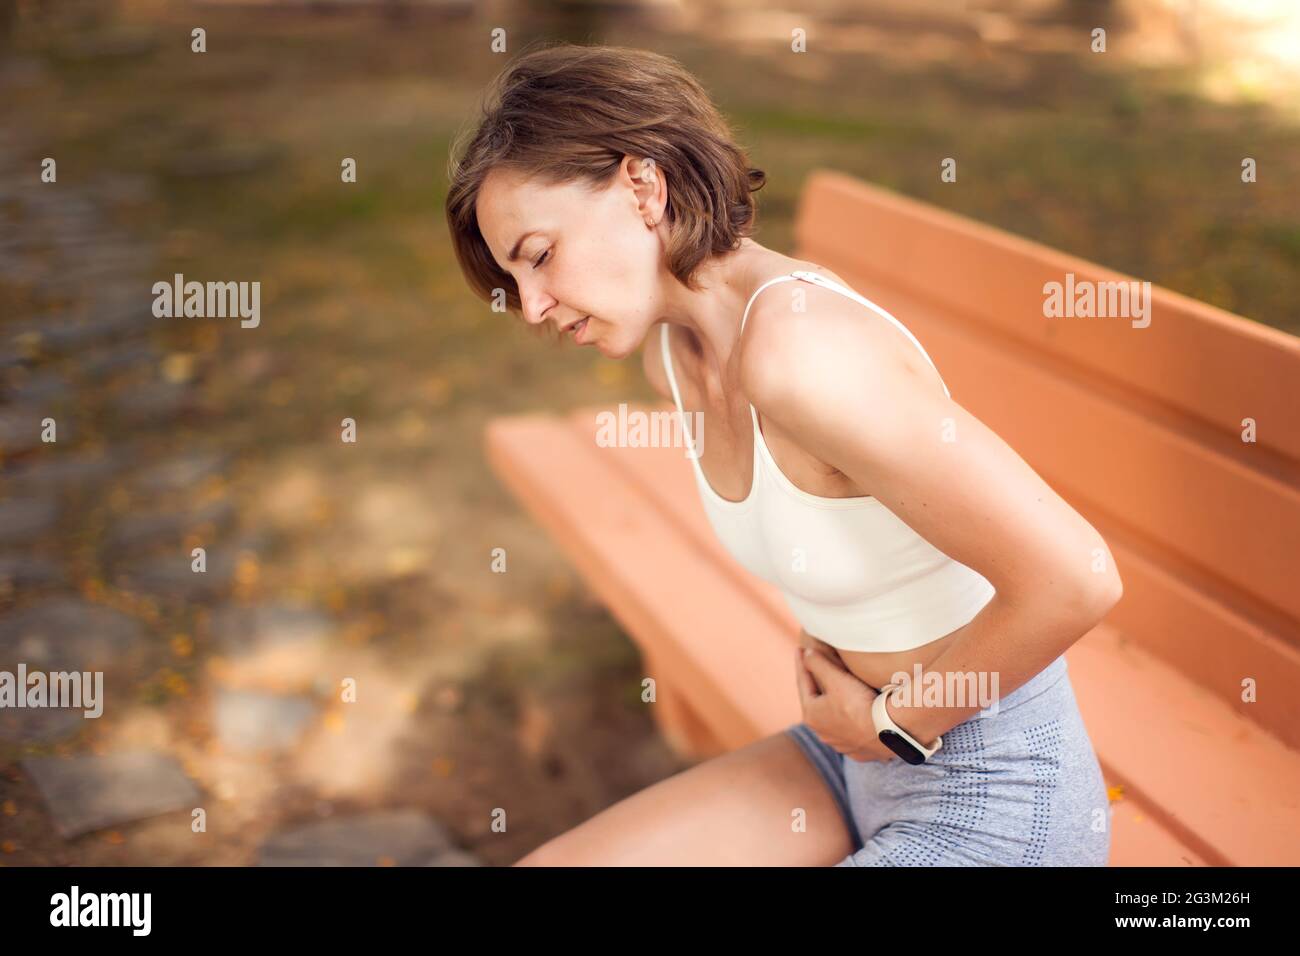 Sports woman with stomach pain in the park. Fitness, healthcare and medicine concept Stock Photo